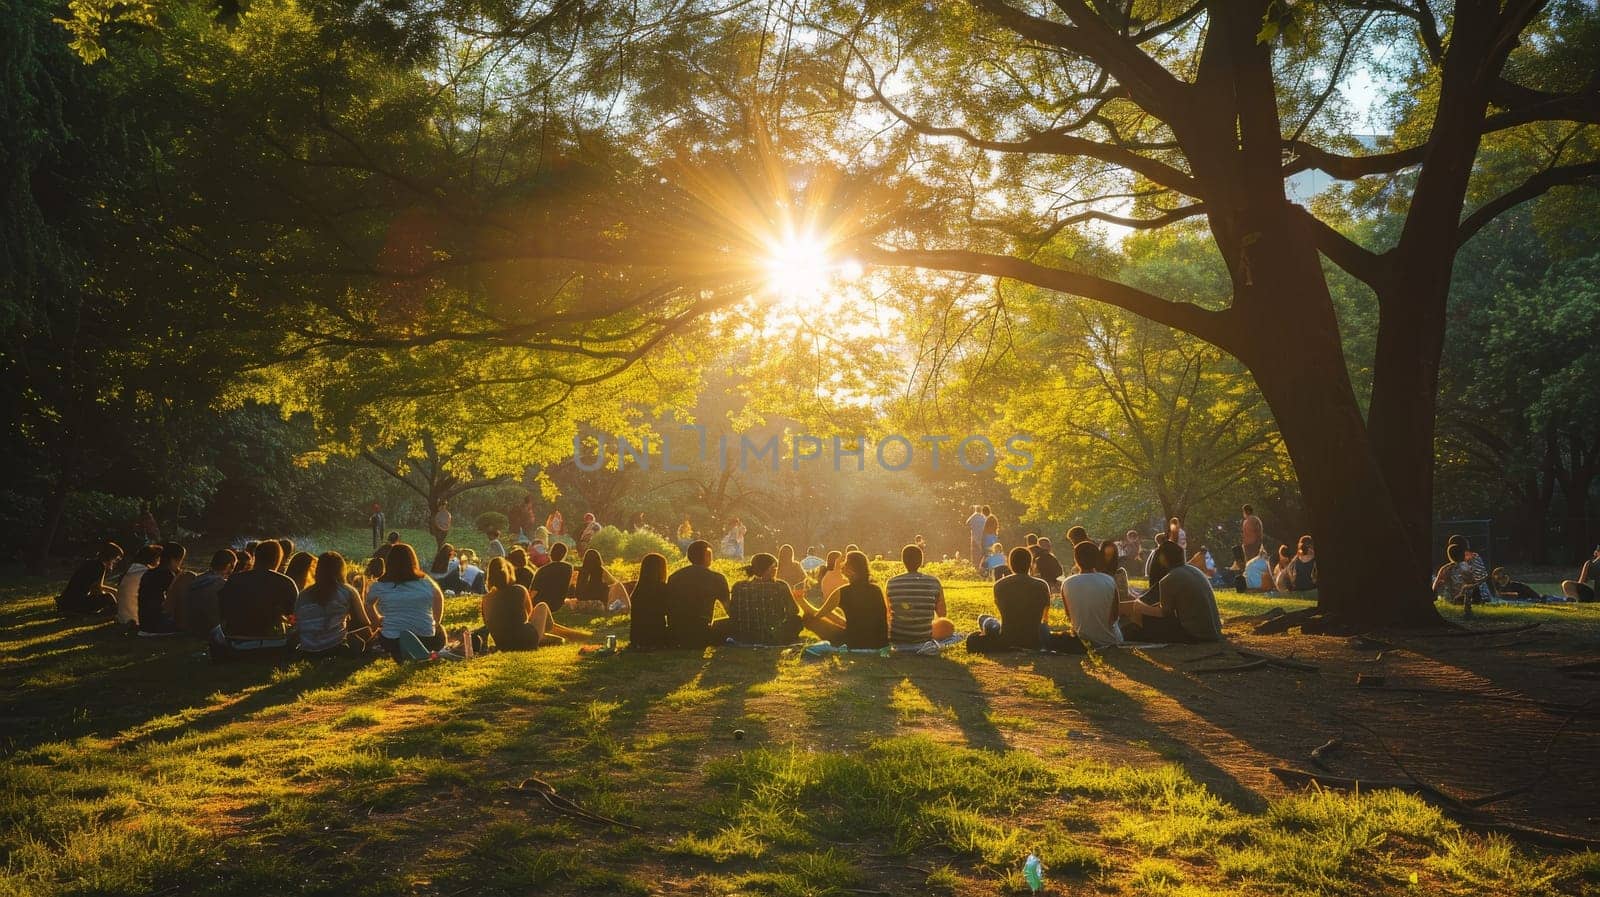 A large group of people are sitting in a park under a tree. The sun is shining brightly, casting a warm glow on the scene. The atmosphere is relaxed and peaceful